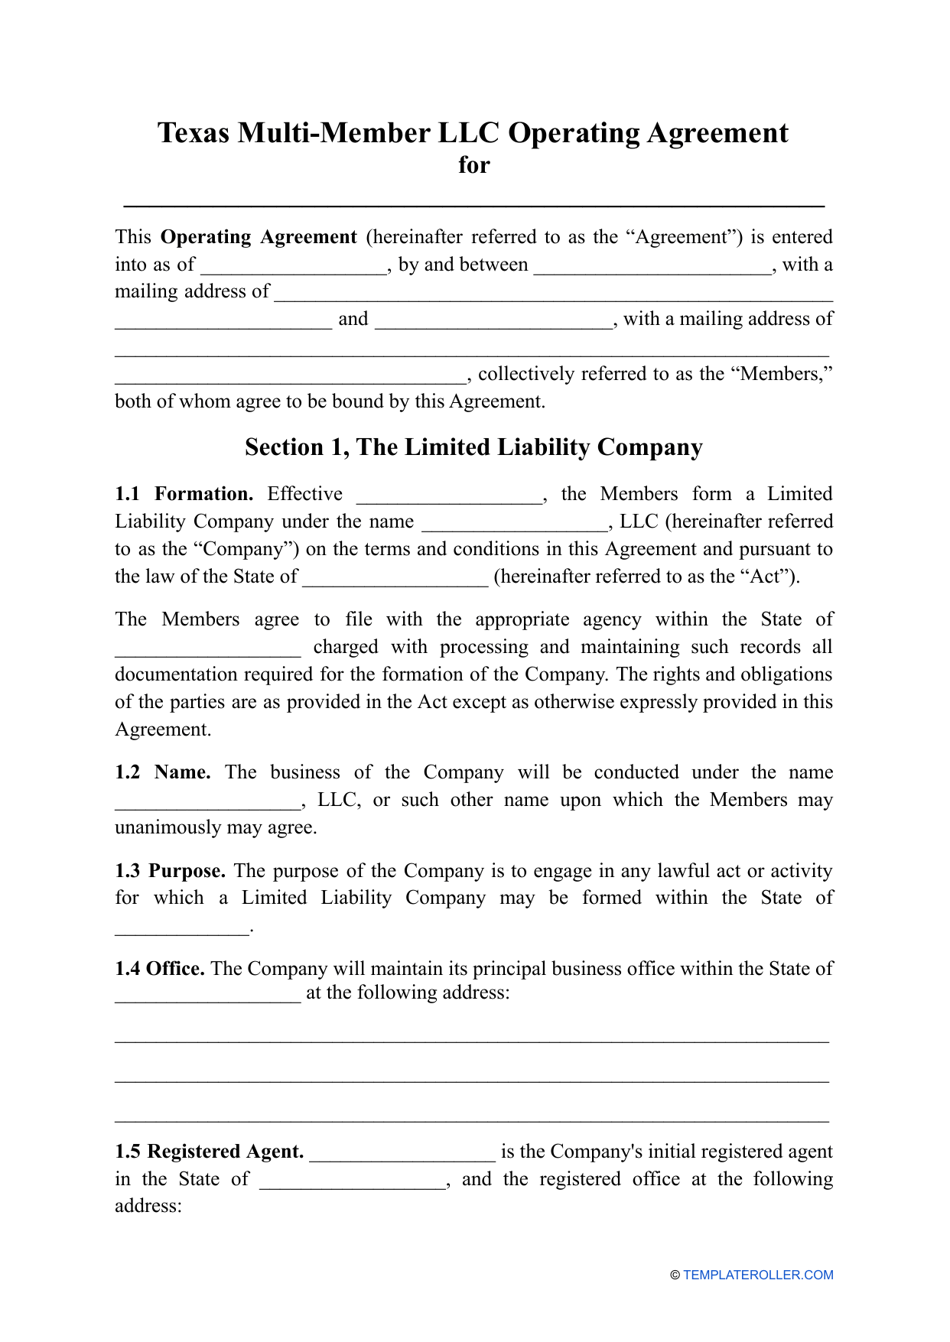 Multi-Member LLC Operating Agreement Template - Texas, Page 1